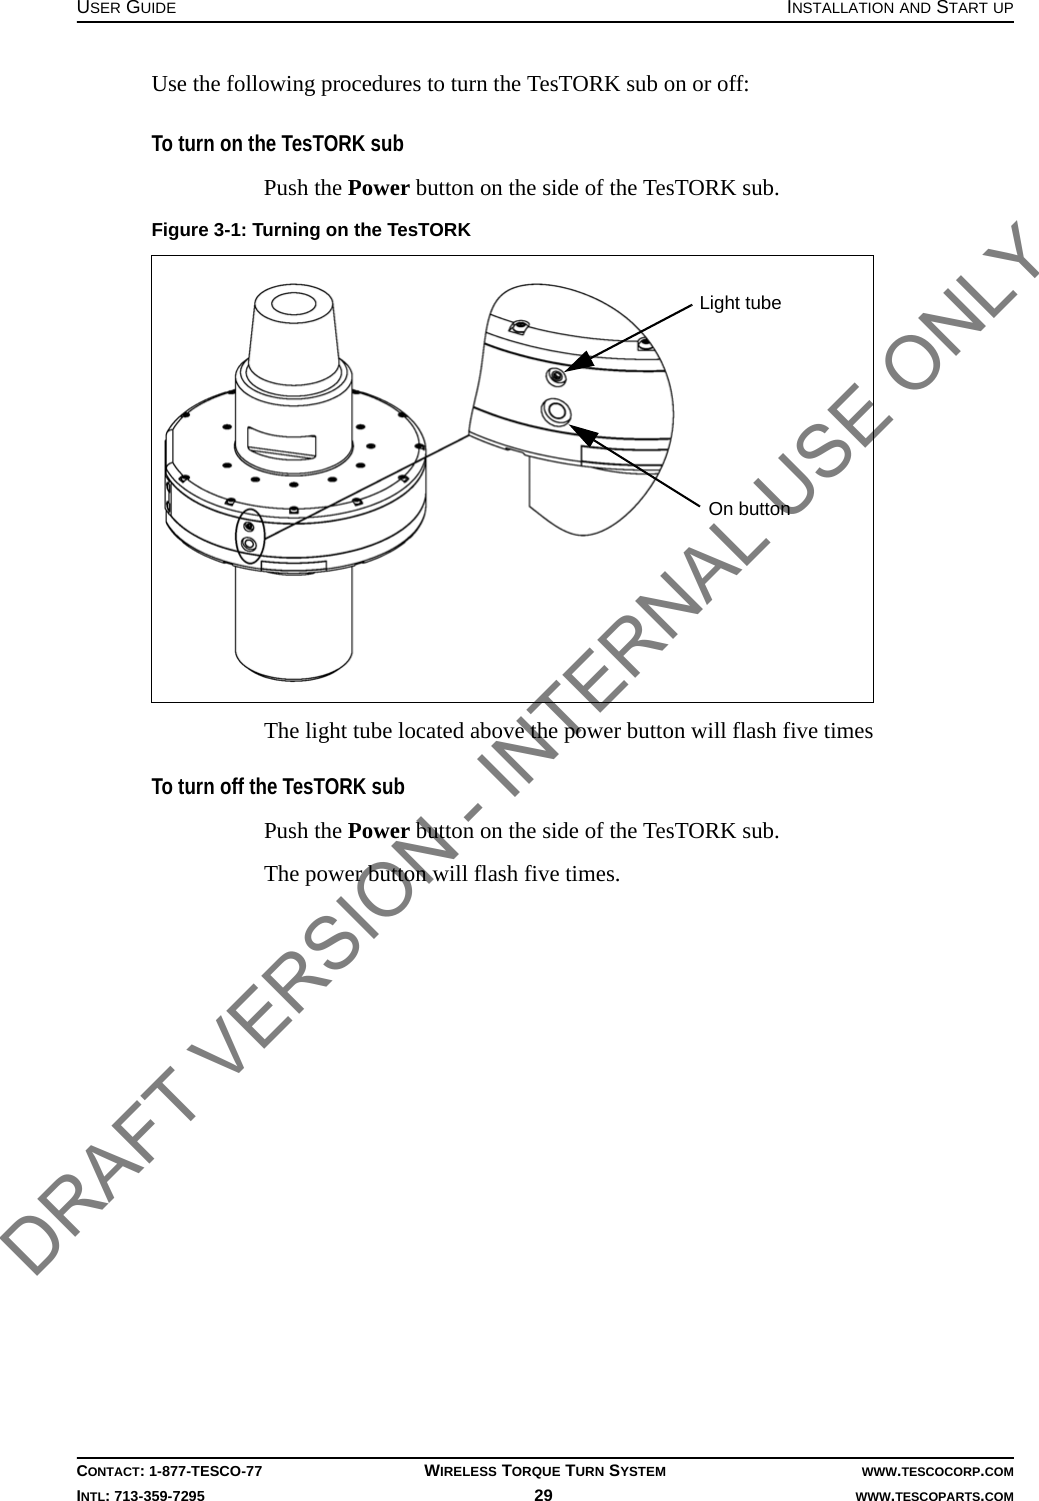 USER GUIDE INSTALLATION AND START UPCONTACT: 1-877-TESCO-77 WIRELESS TORQUE TURN SYSTEM WWW.TESCOCORP.COMINTL: 713-359-7295 29    WWW.TESCOPARTS.COMUse the following procedures to turn the TesTORK sub on or off:To turn on the TesTORK subPush the Power button on the side of the TesTORK sub.The light tube located above the power button will flash five timesTo turn off the TesTORK subPush the Power button on the side of the TesTORK sub.The power button will flash five times.Figure 3-1: Turning on the TesTORKOn buttonLight tubeDRAFT VERSION - INTERNAL USE ONLY